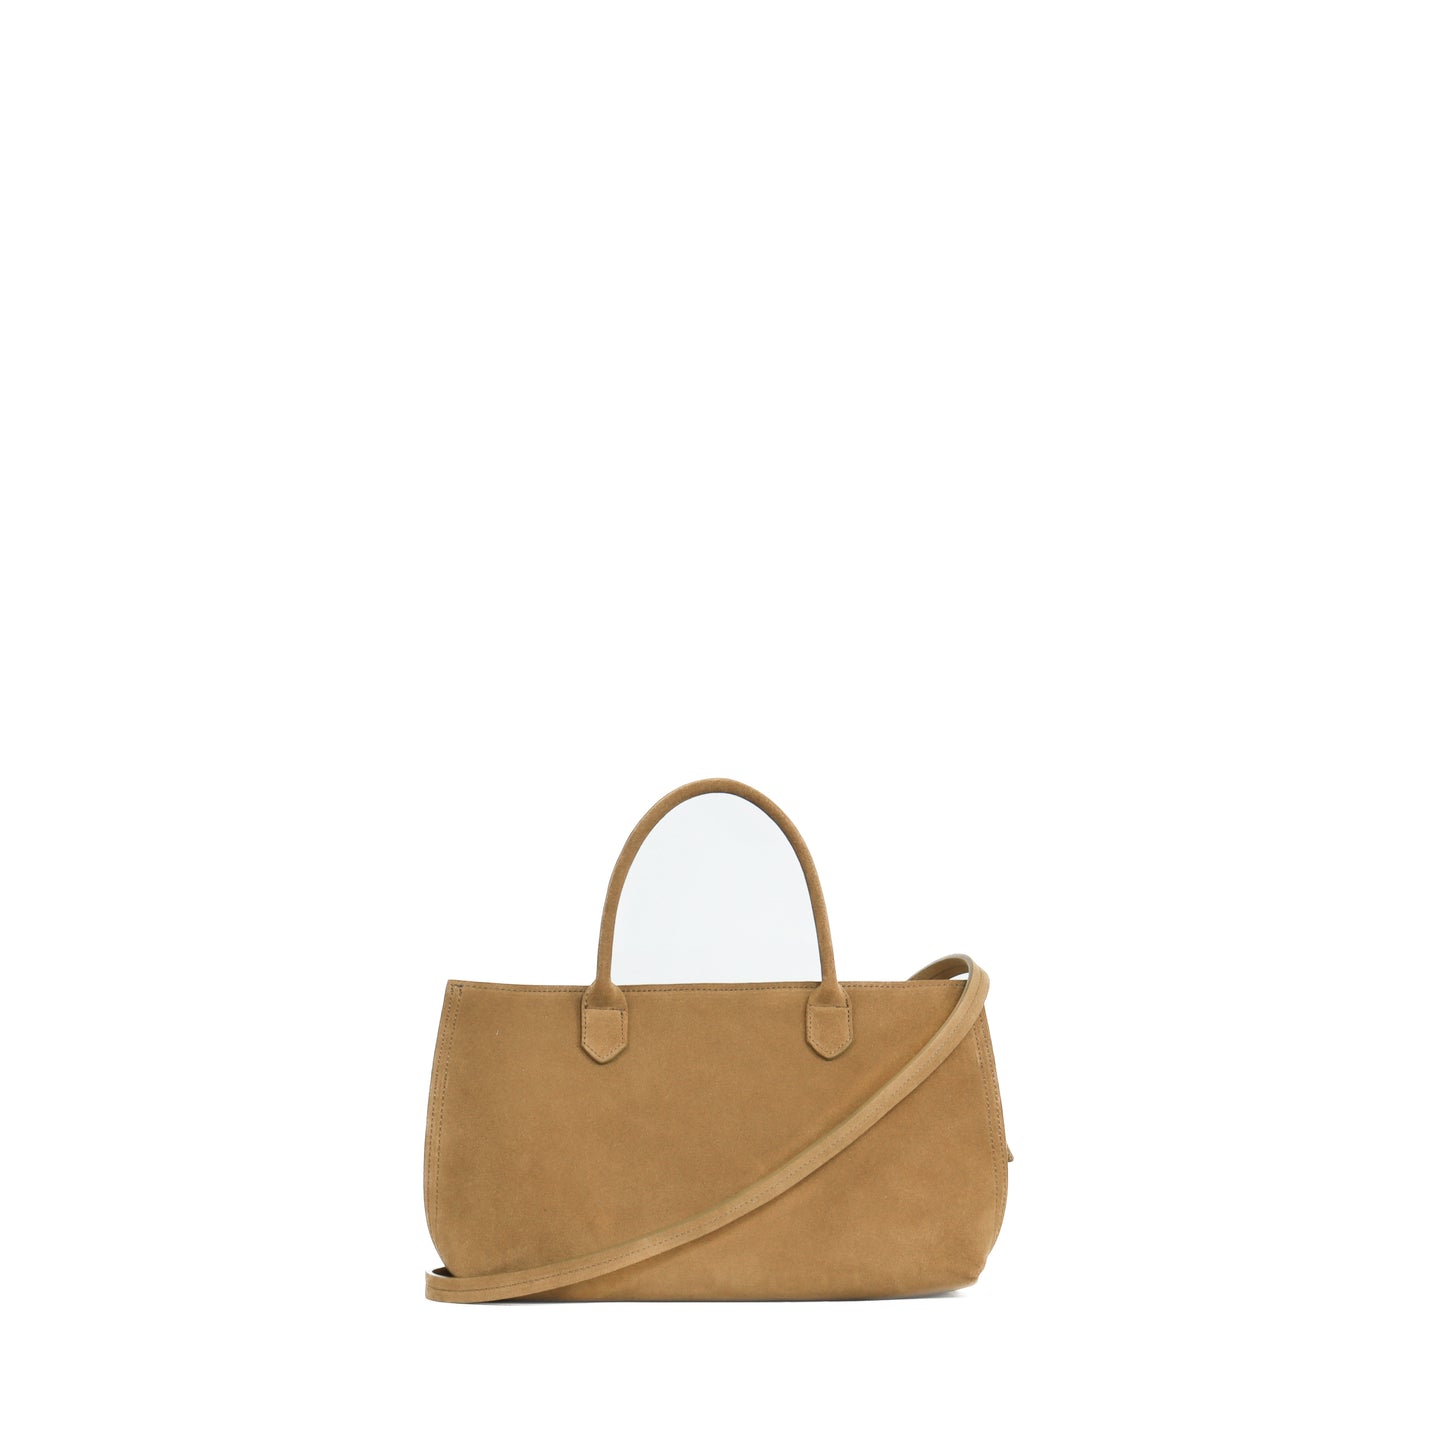 SMALL DAY BAG OCHRE SUEDE